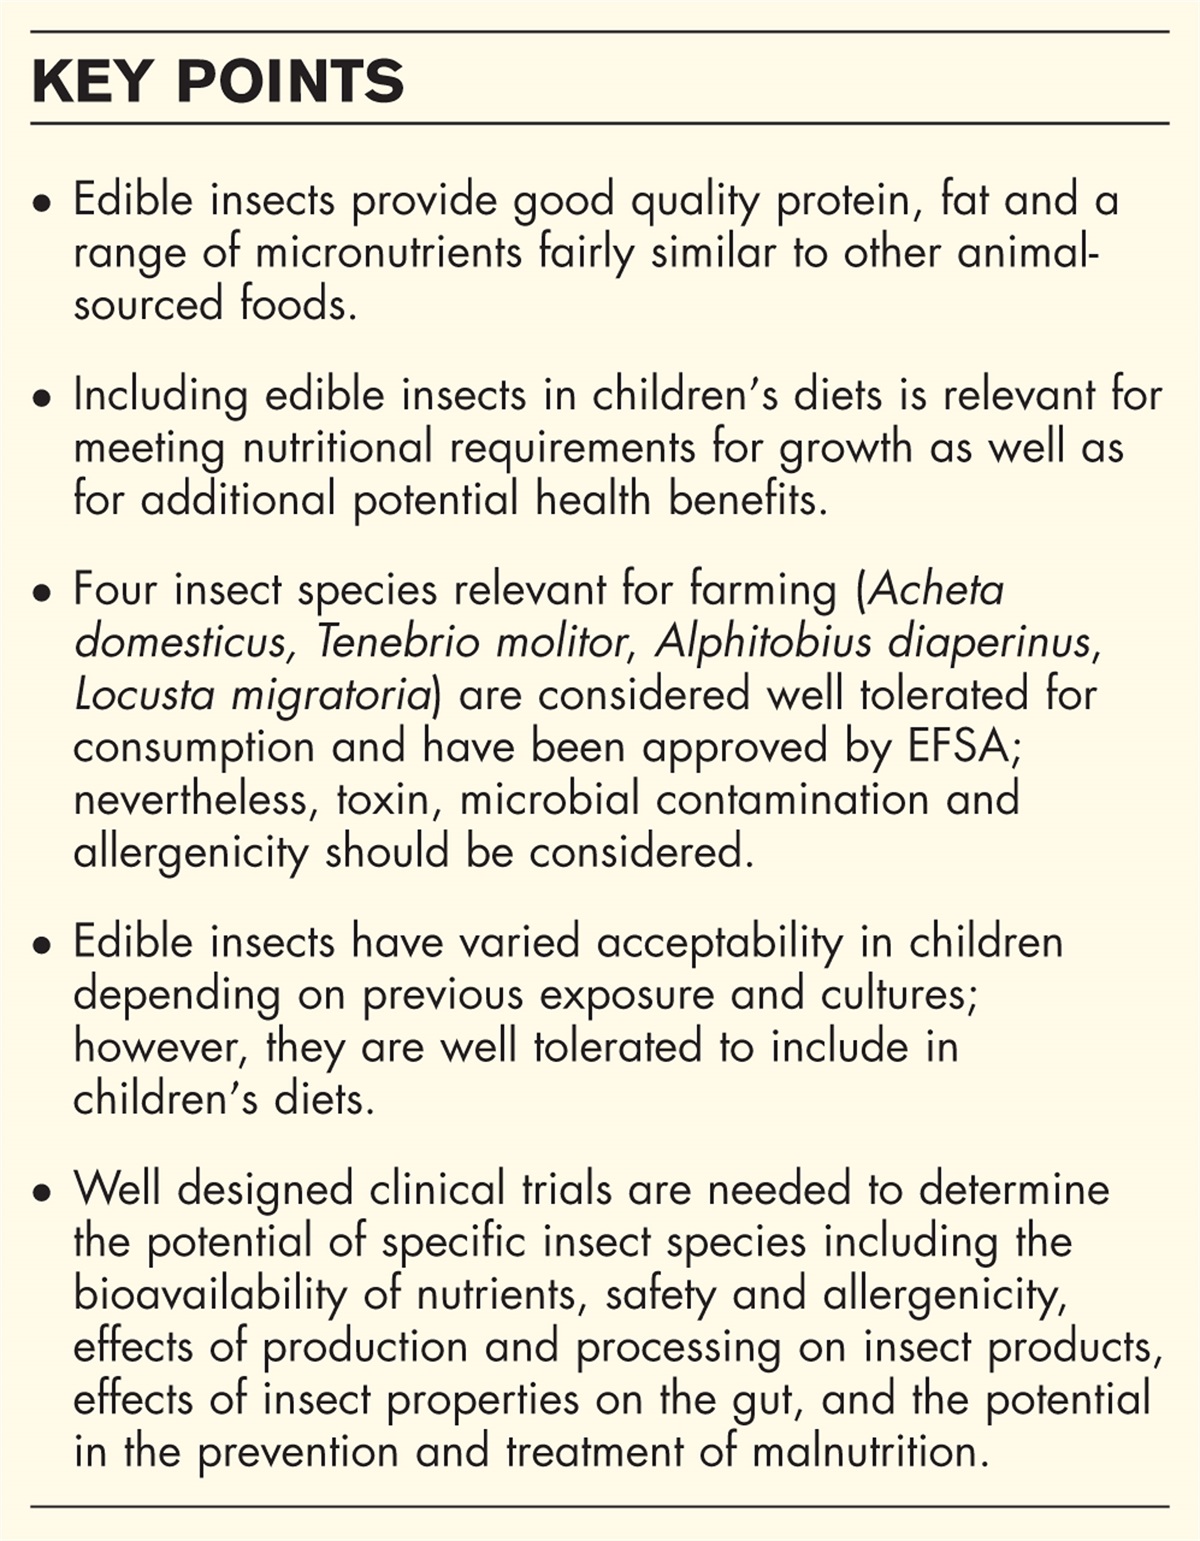 Should we provide edible insects in children's diets?